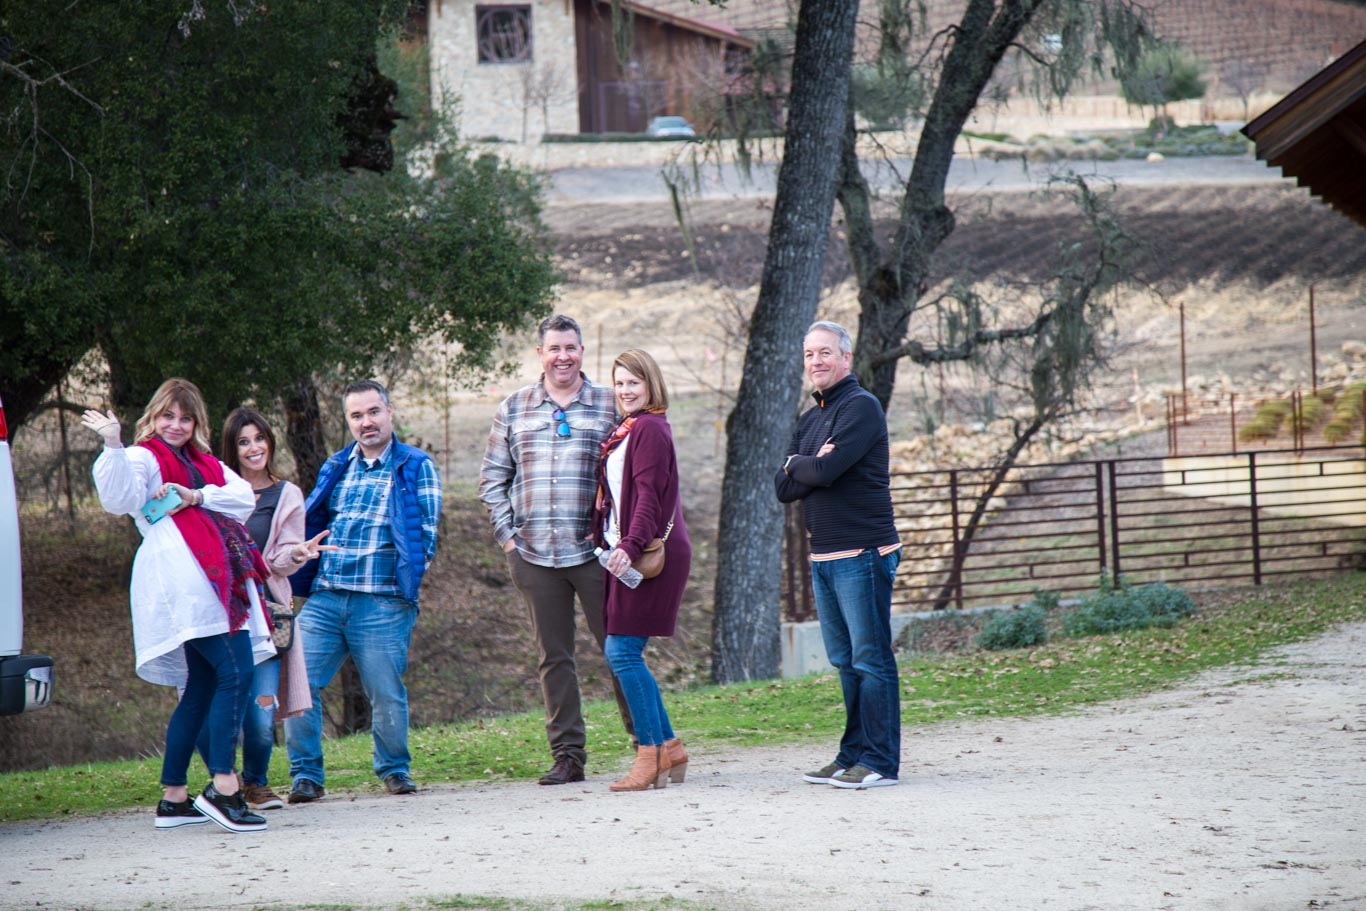 Candid Group Shot - Wine tasting in Paso Robles